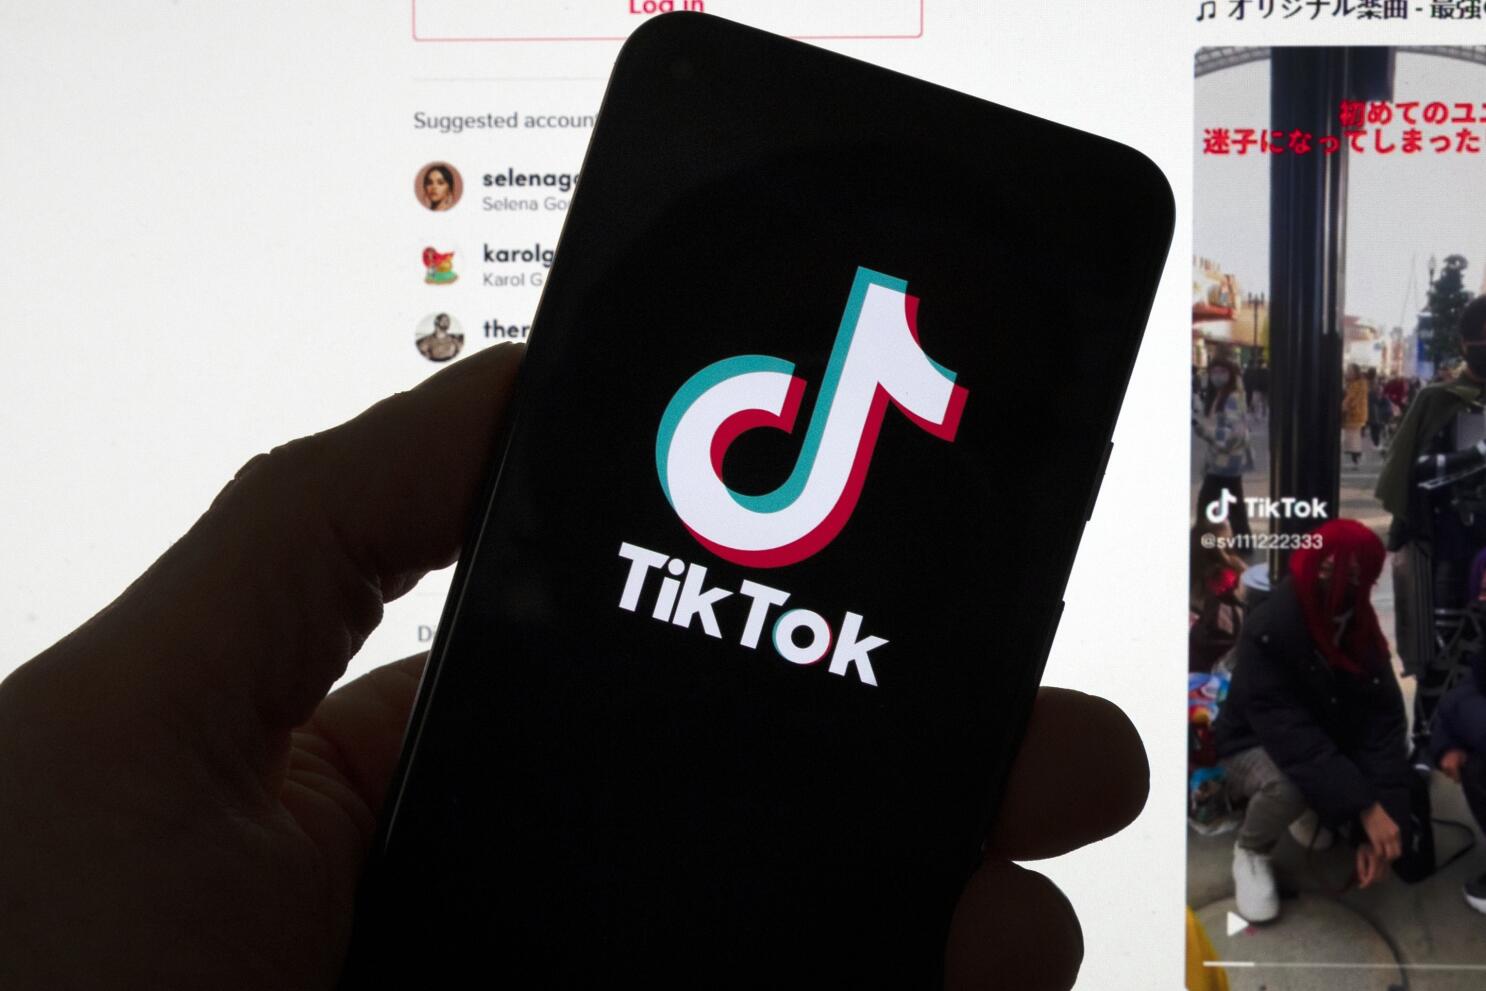 The political realities that make a national TikTok ban tricky